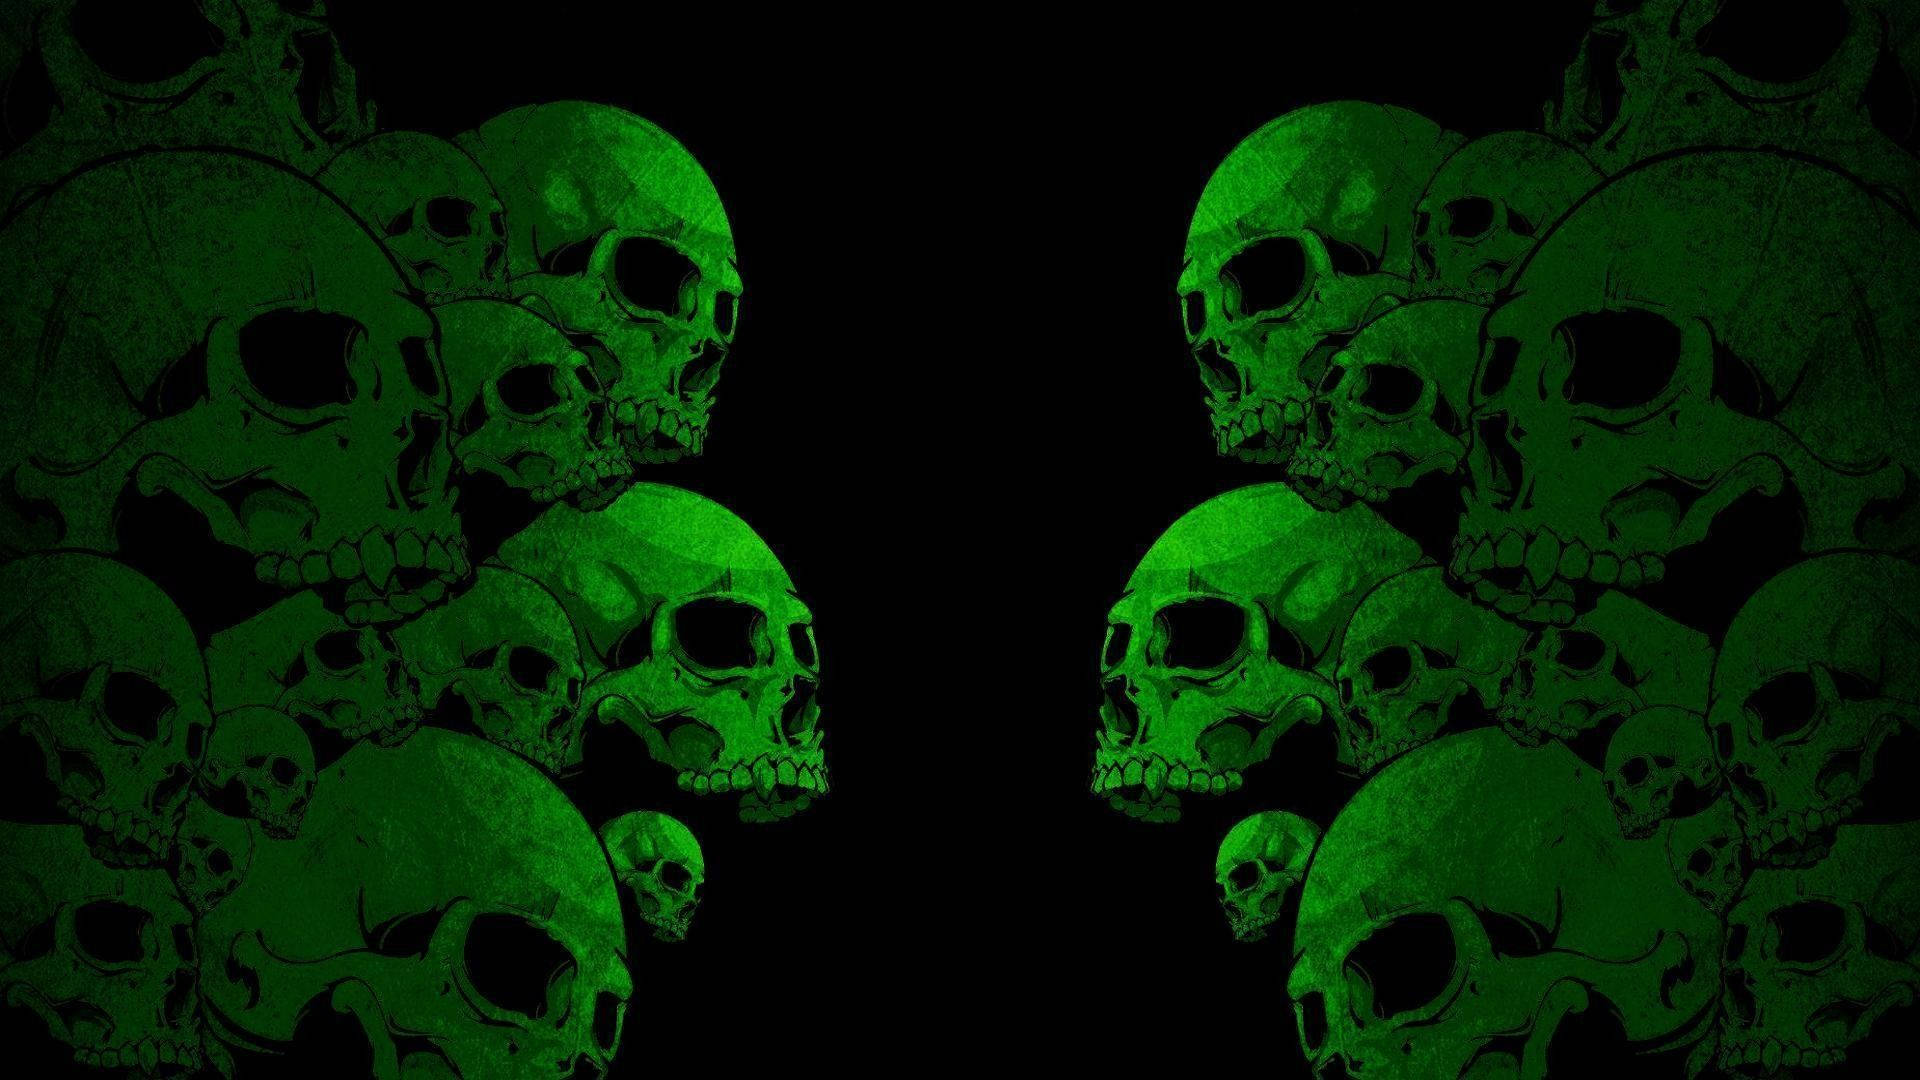 "The Green Fire Skull shines with danger but also beauty" Wallpaper